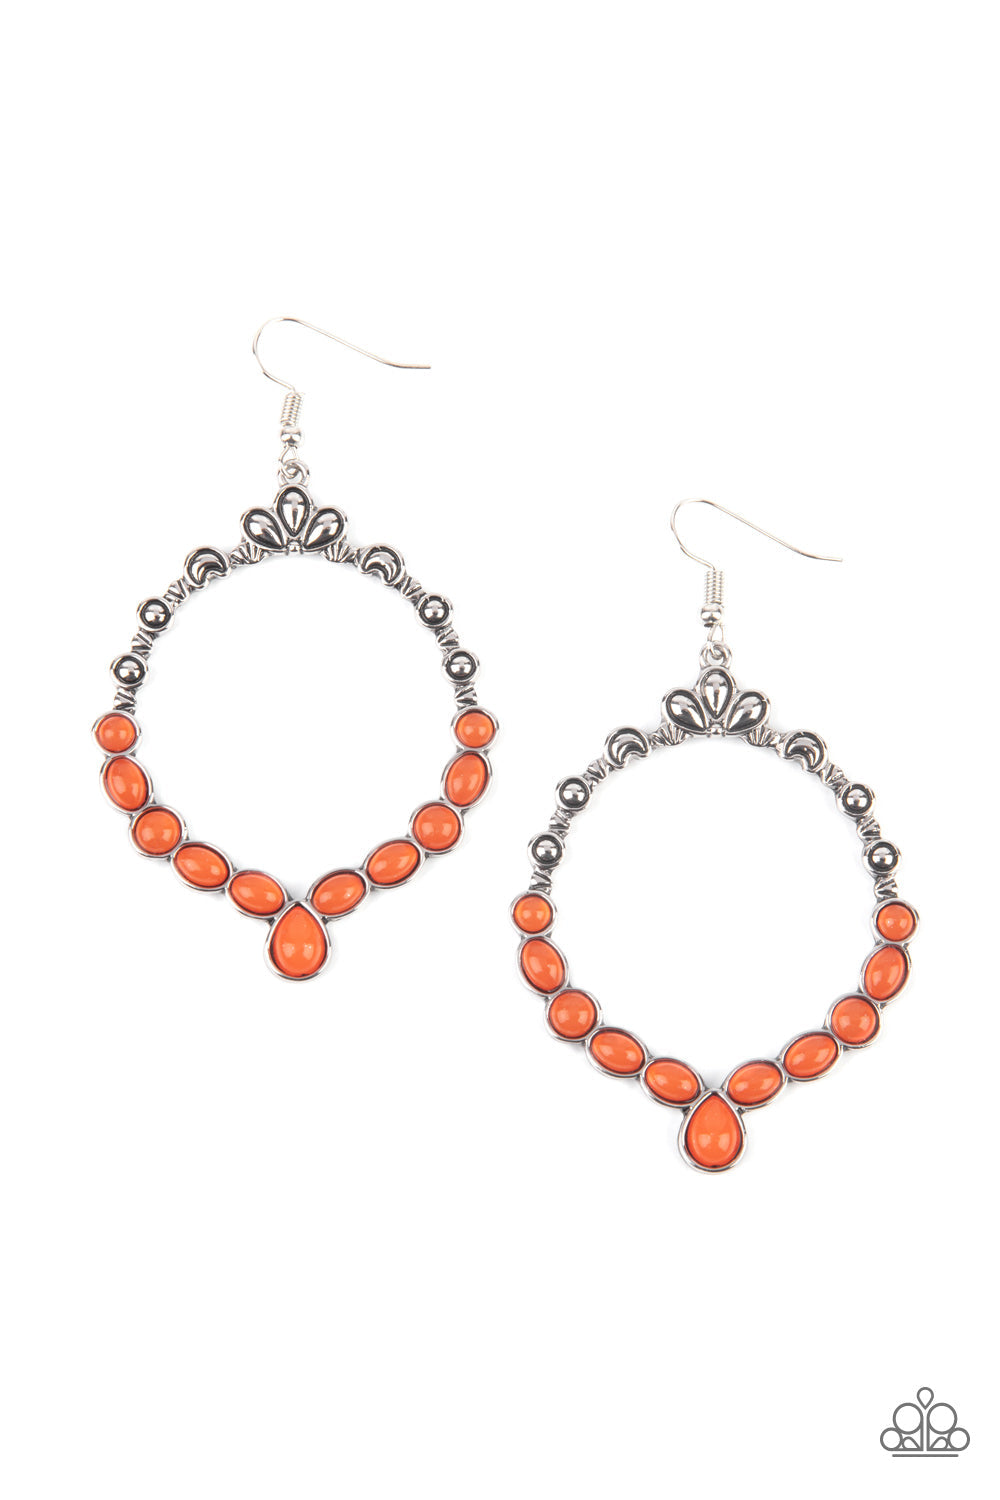 Thai Treasures - Orange and Silver Earrings - Paparazzi Accessories - Ornate floral motifs decorate the top half of an airy circular silver frame. A row of dewy orange oval and round beads creates a border along the lower half of the frame, culminating in a single teardrop accent for a demurely enchanting lure.